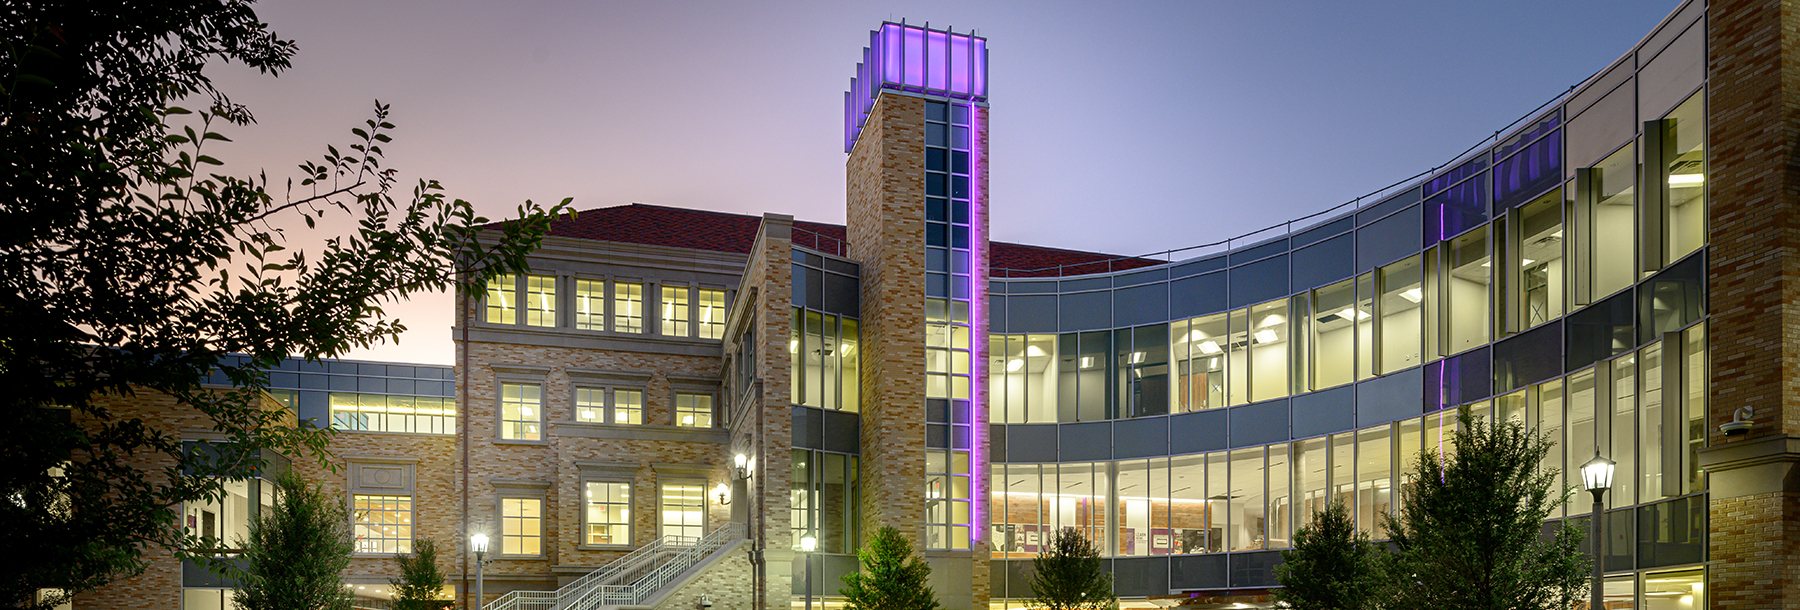 Section Image: Hays Sumner Business Commons 